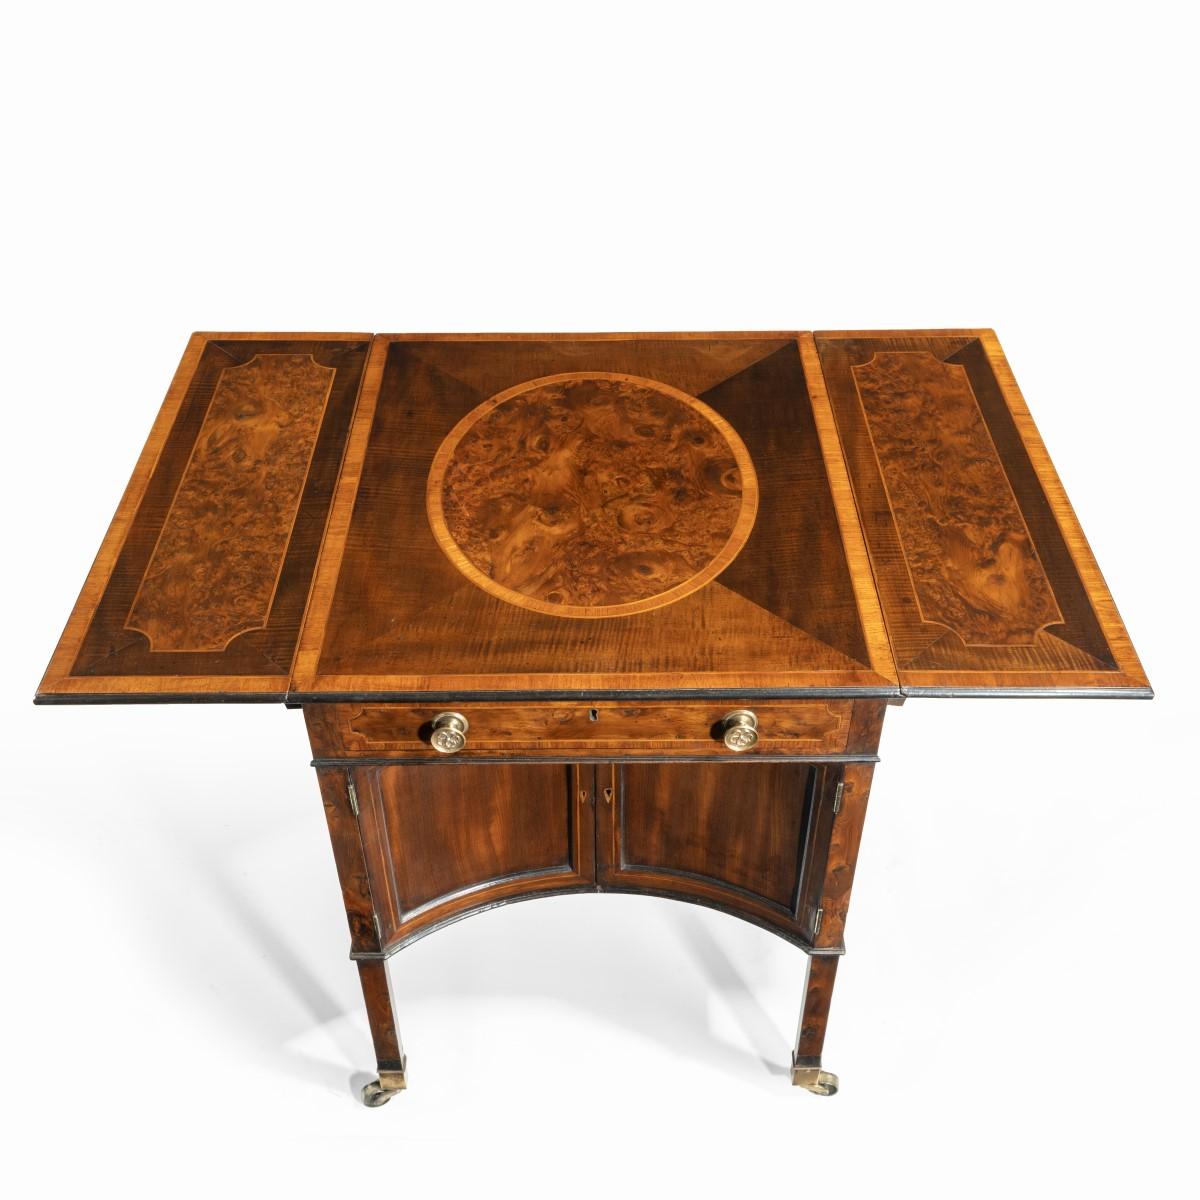 An Exceptional George III Period Breakfast or Supper Table, Attributed to Henry Kettle